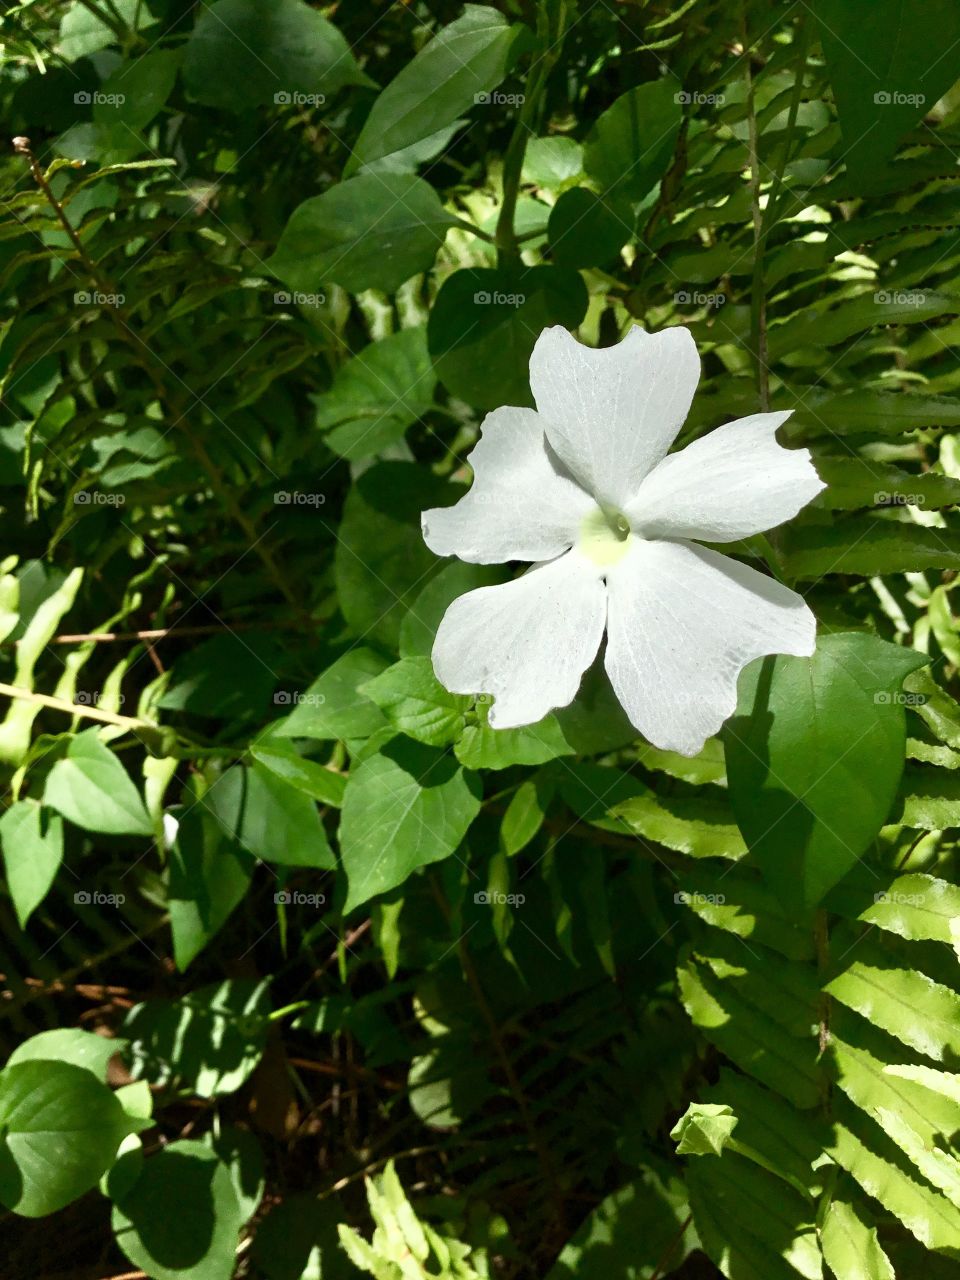 Thunbergia fragrans
Common Names: White Lady, Whitelady, White Thunbergia, Sweet Clock-vine, White Clock-vine
Hawaii Native Status: Introduced. This naturalized ornamental garden plant is native to India and other parts of Asia.